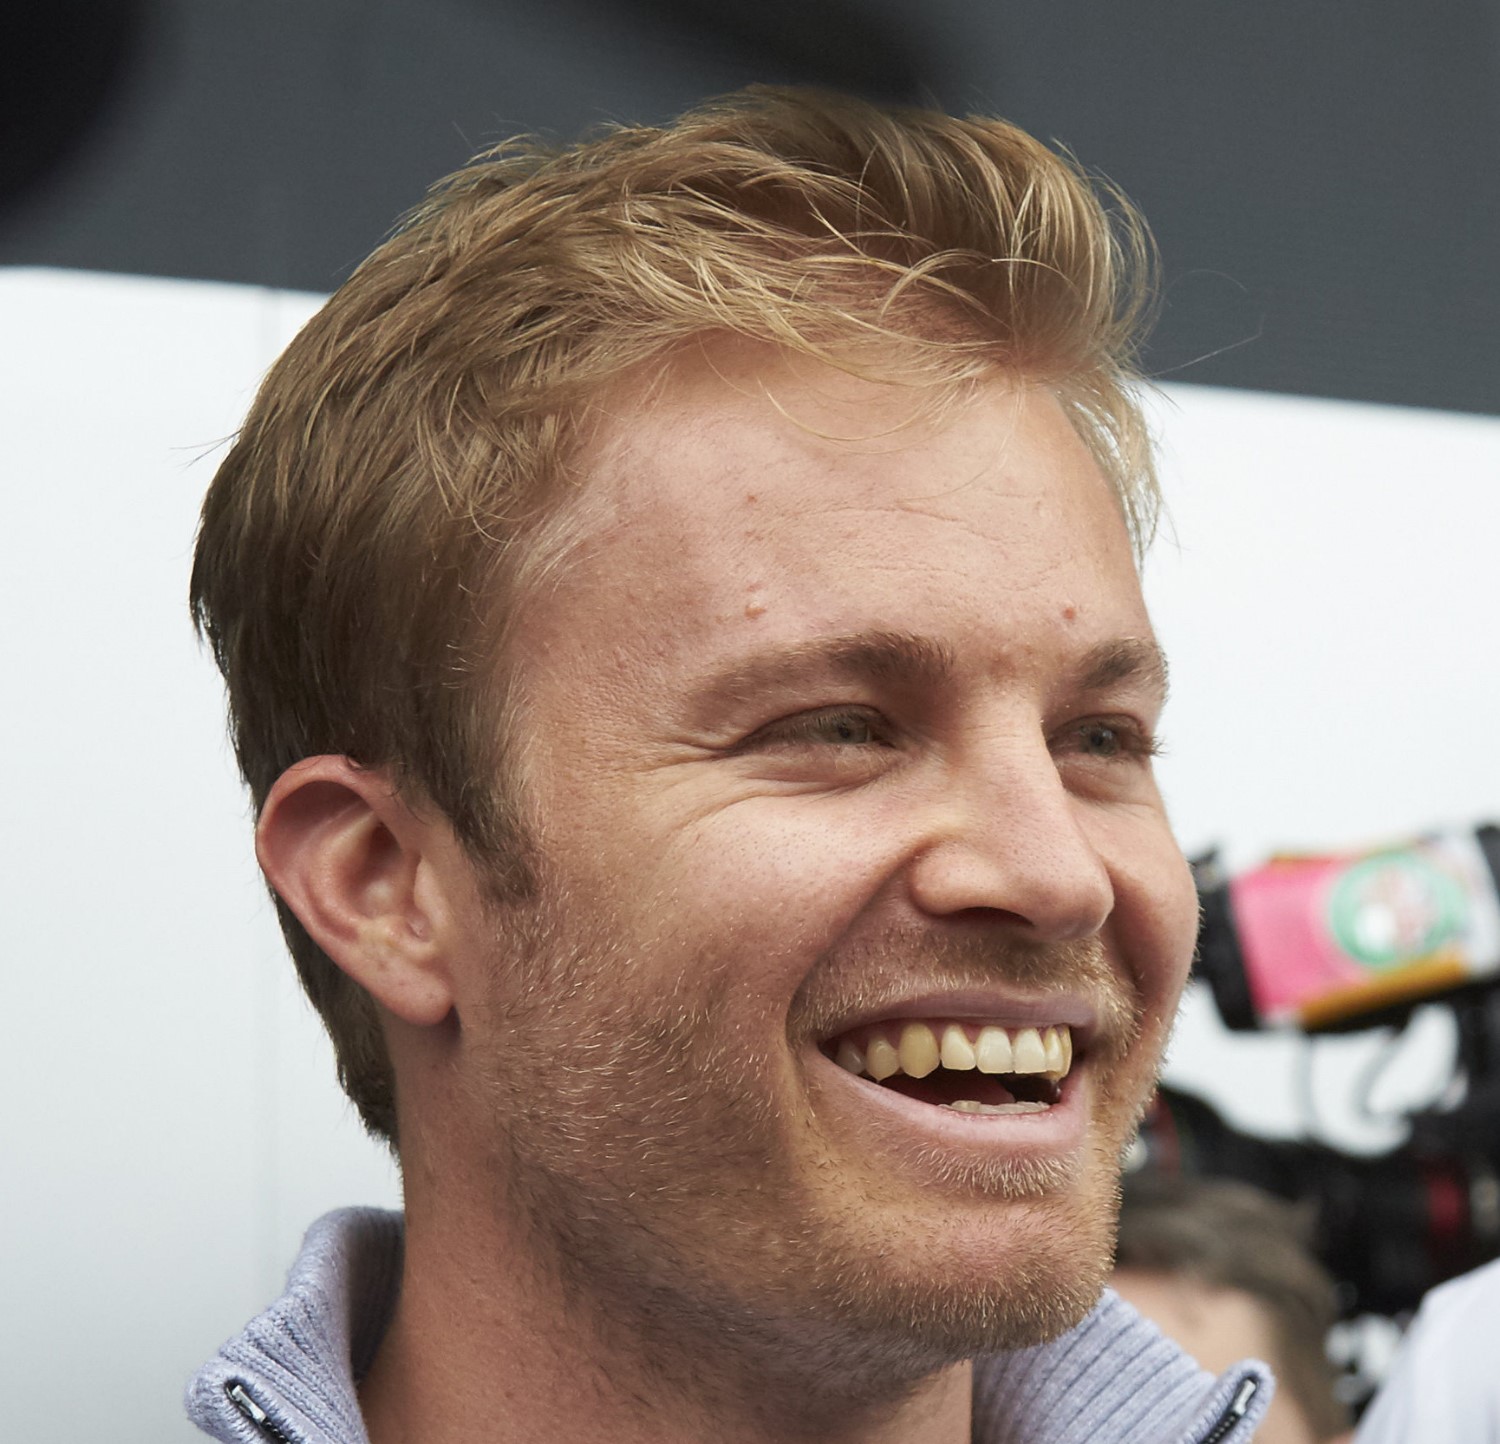 Rosberg expected to choke by the Brits